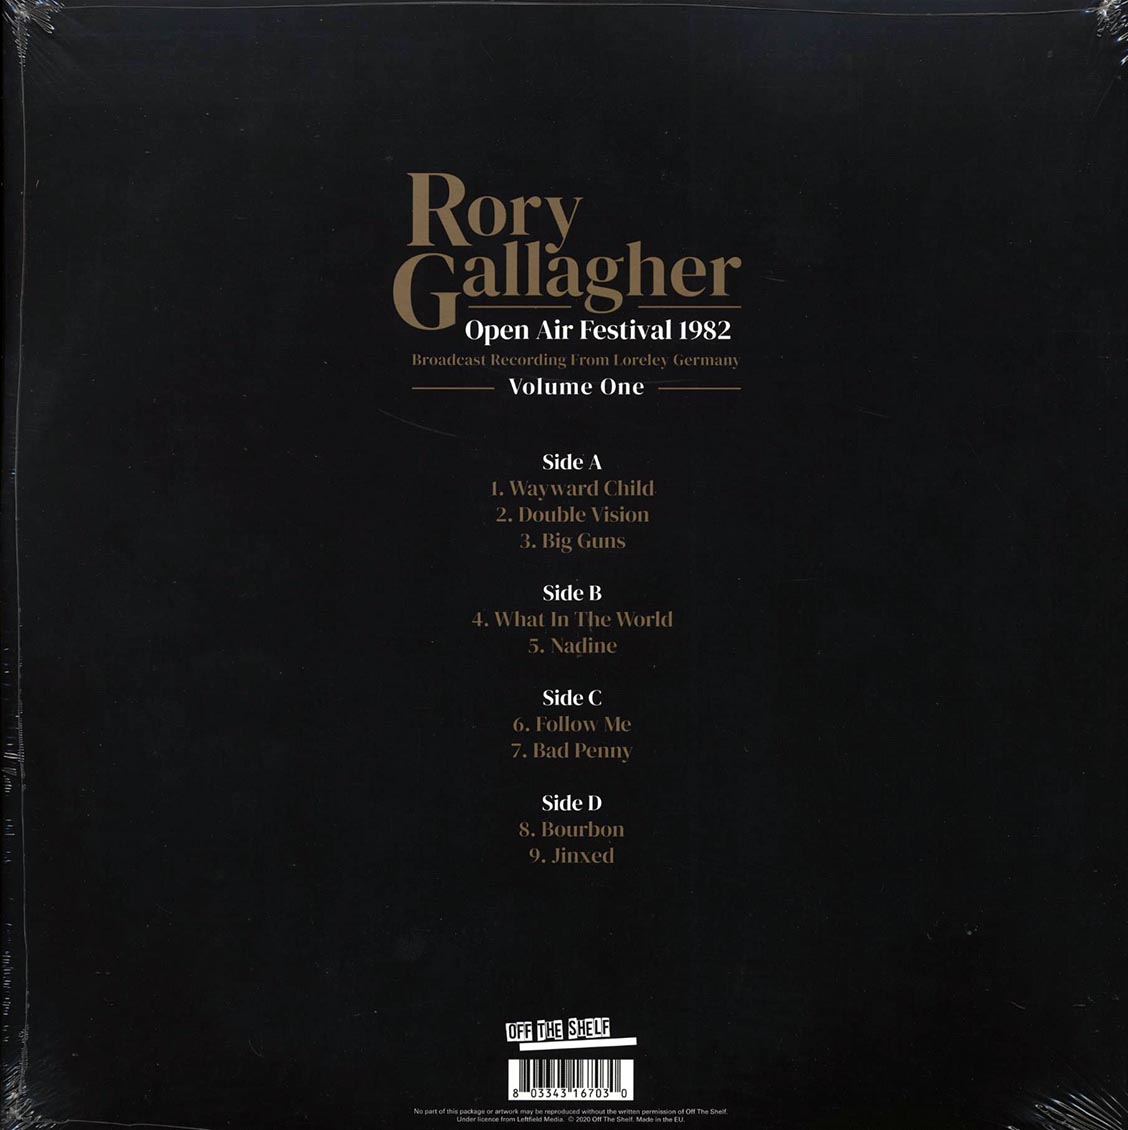 Rory Gallagher - Open Air Festival 1982 Volume 1: Broadcast Recording From Loreley Germany (2xLP) - Vinyl LP, LP